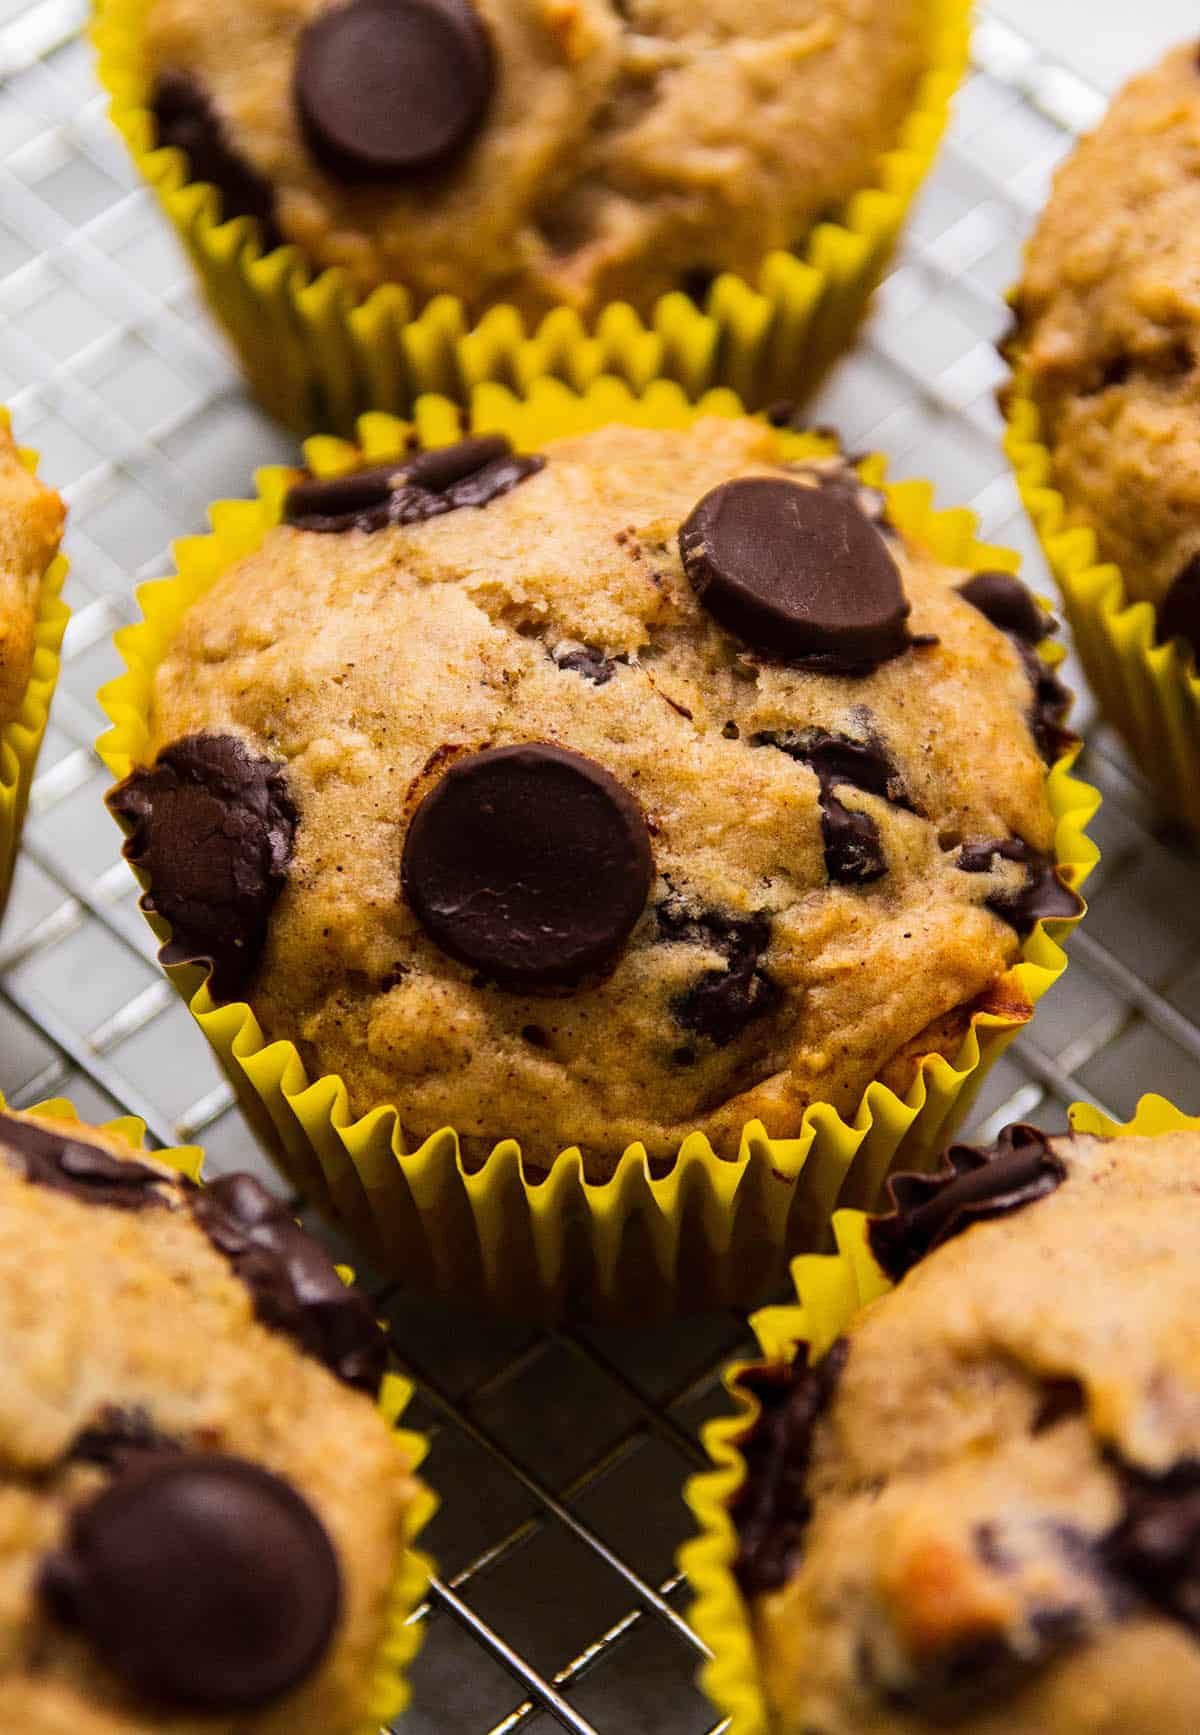 Banana chocolate chip muffins on a wire cooling rack.